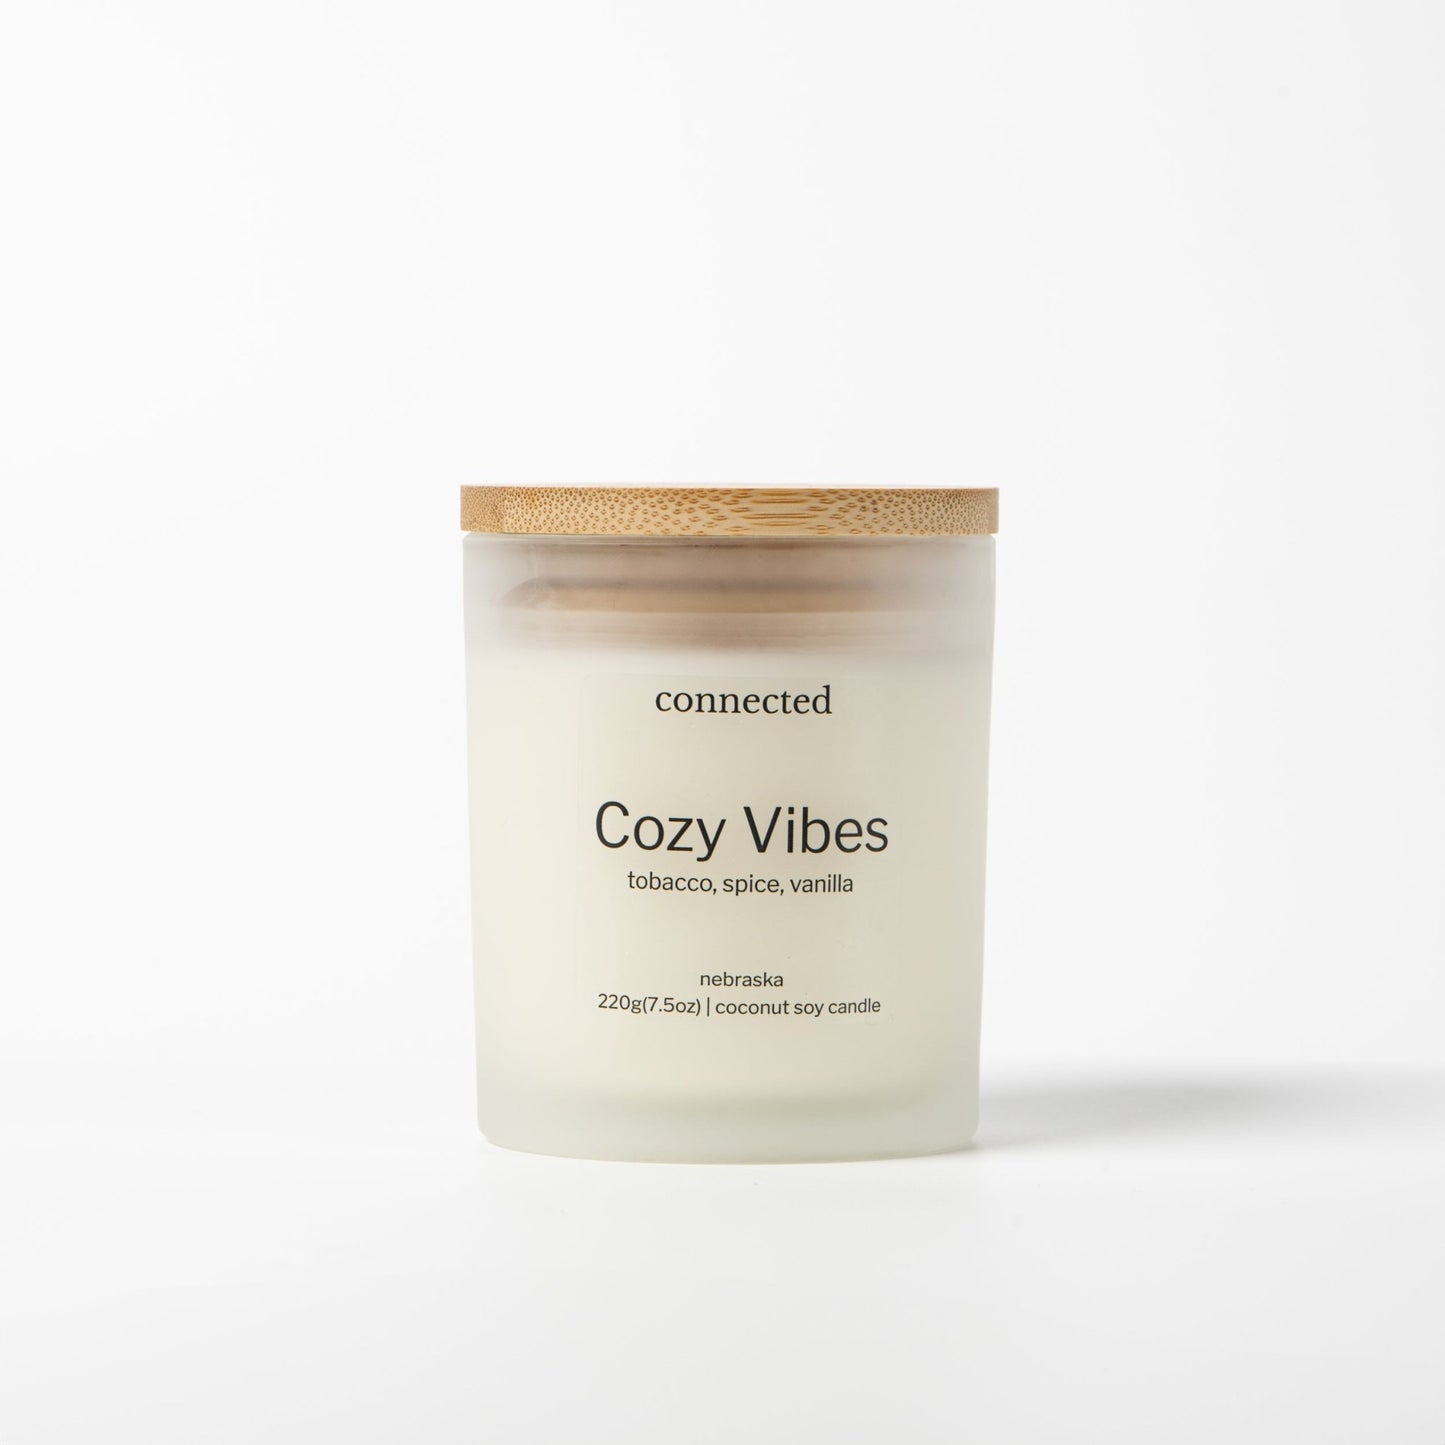 Cozy Vibes -Coconut Soy Candles - Connected Fragrance Company - Connected Fragrance Company